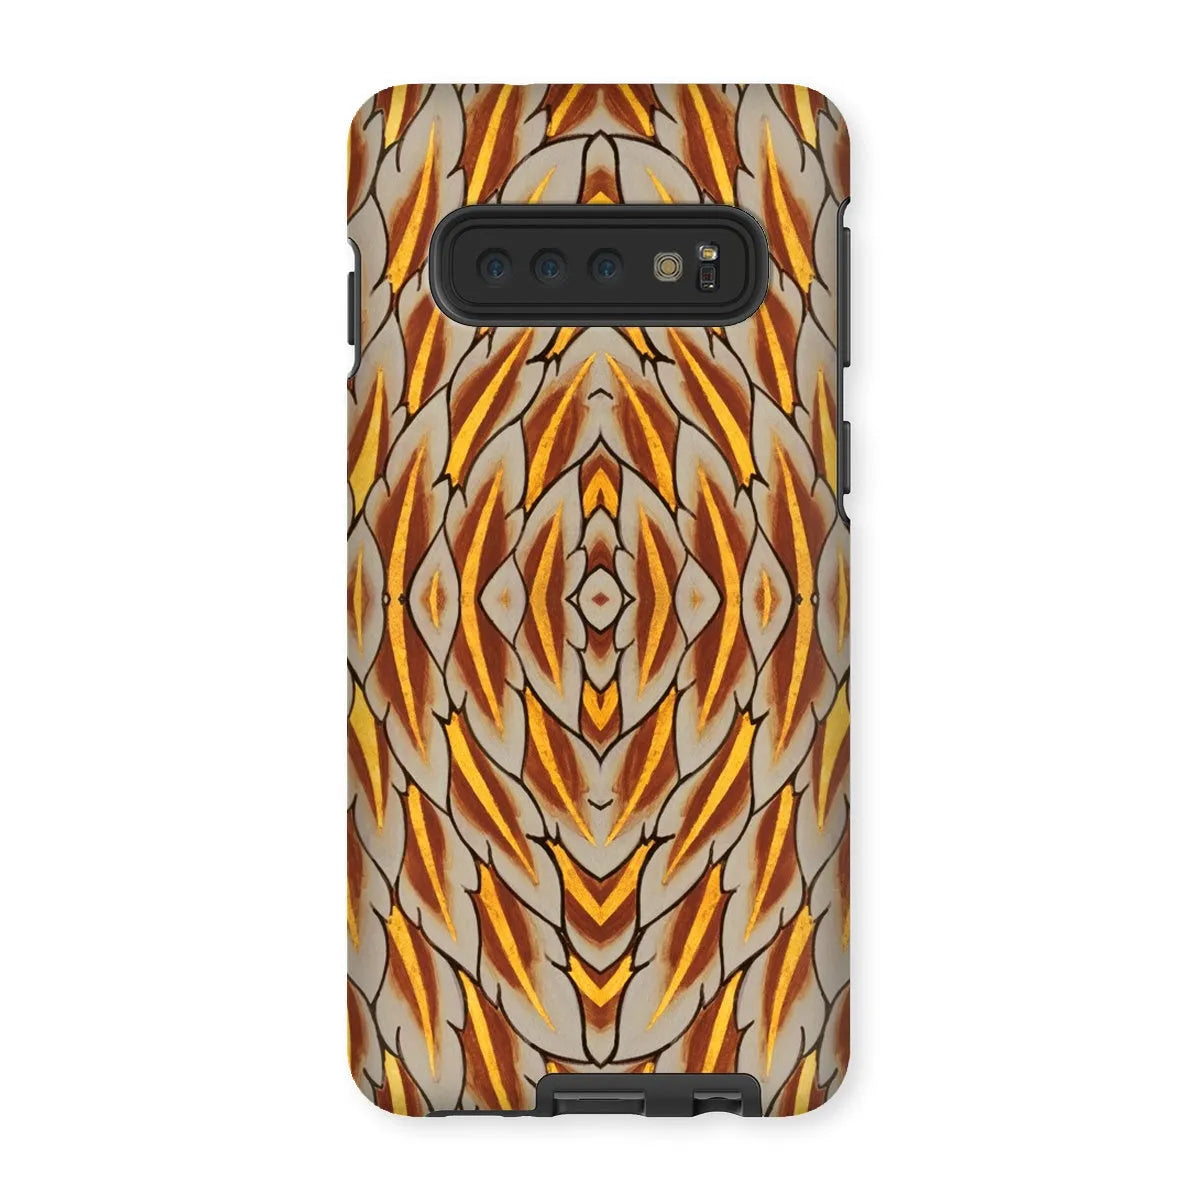 Featherweight Champion Thai Aesthetic Art Phone Case - Samsung Galaxy S10 / Matte - Mobile Phone Cases - Aesthetic Art